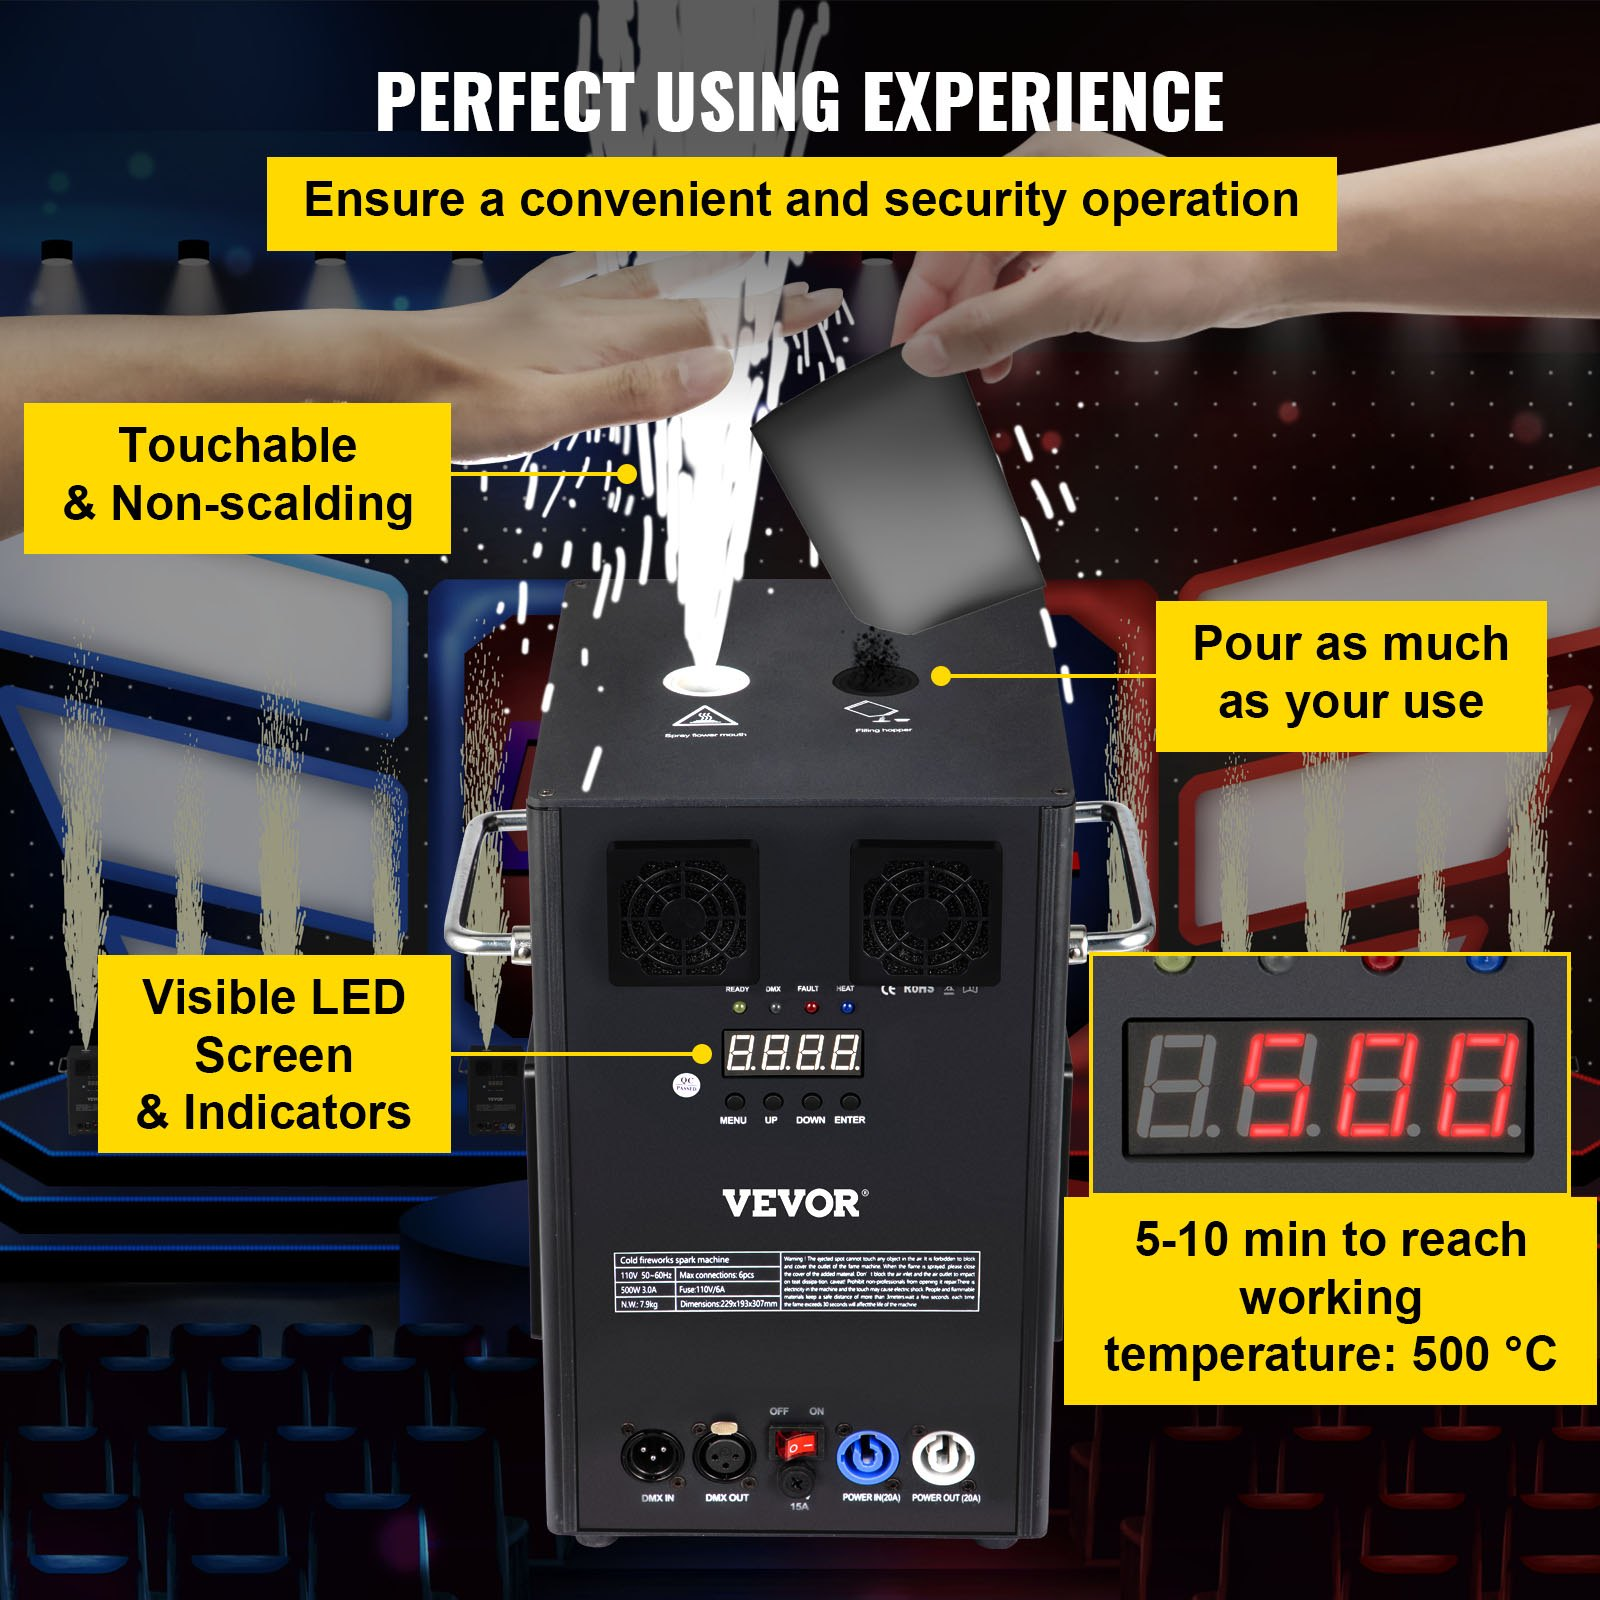 VEVOR 700W 2pcs Large Stage Equipment Special Effect Machine, Smart DMX Control Stage Equipment Showing Machine, Stage Lighting Effect Machine with Wireless Remote Control for Musical Show, Wedding, Goodies N Stuff